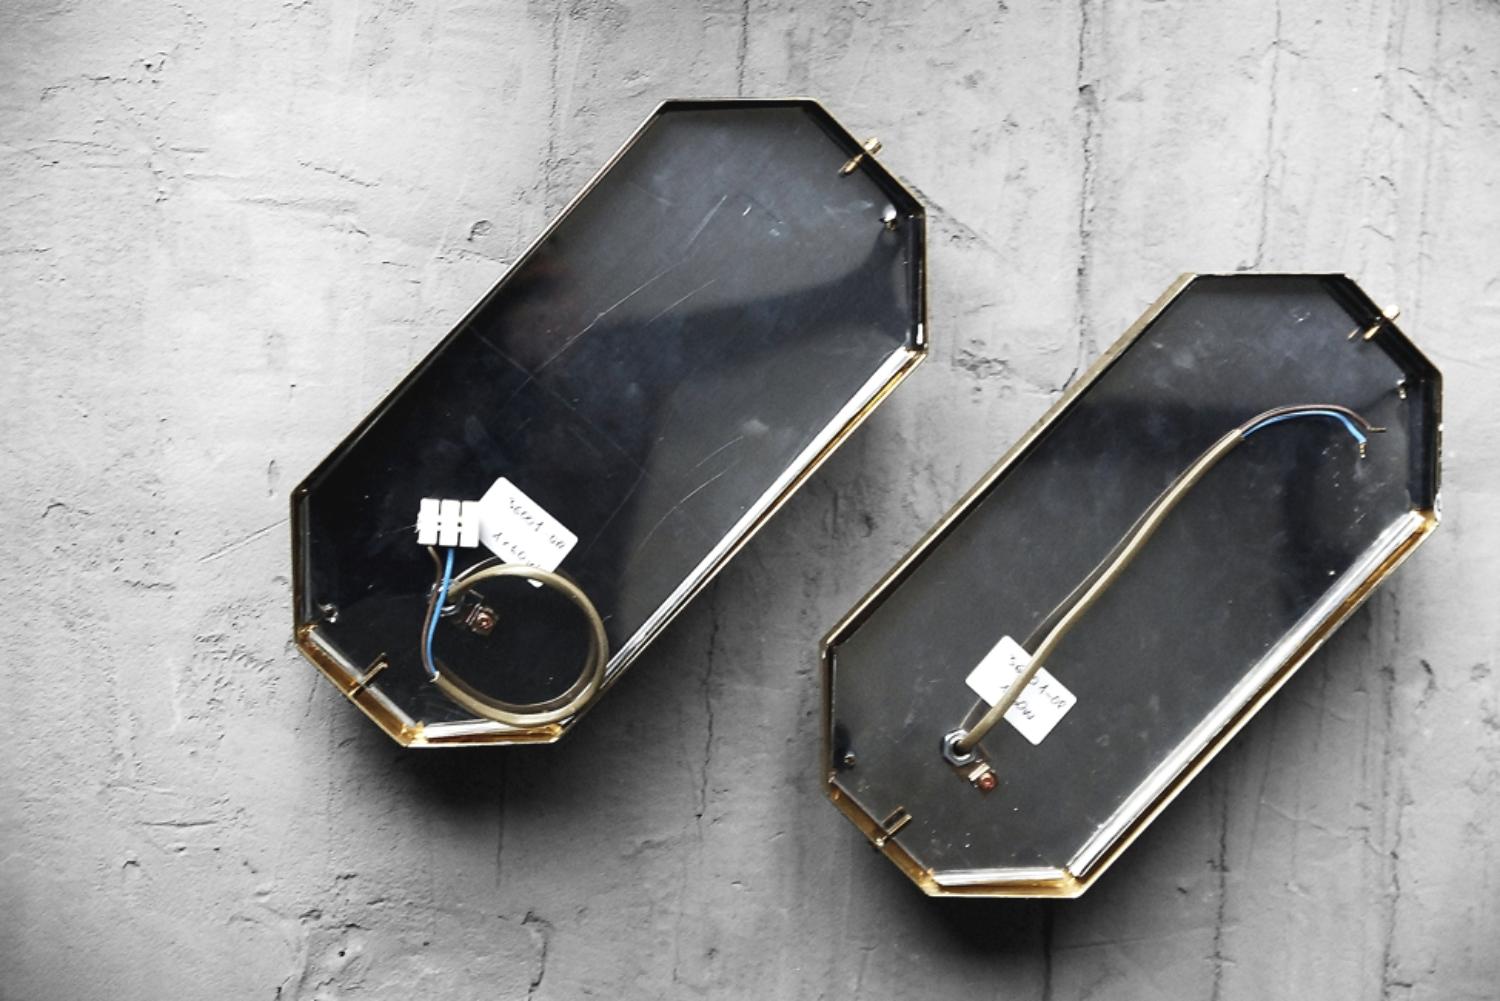 Pair of Geometric Mid-Century Modern Sconces in Brass, 1970s For Sale 1